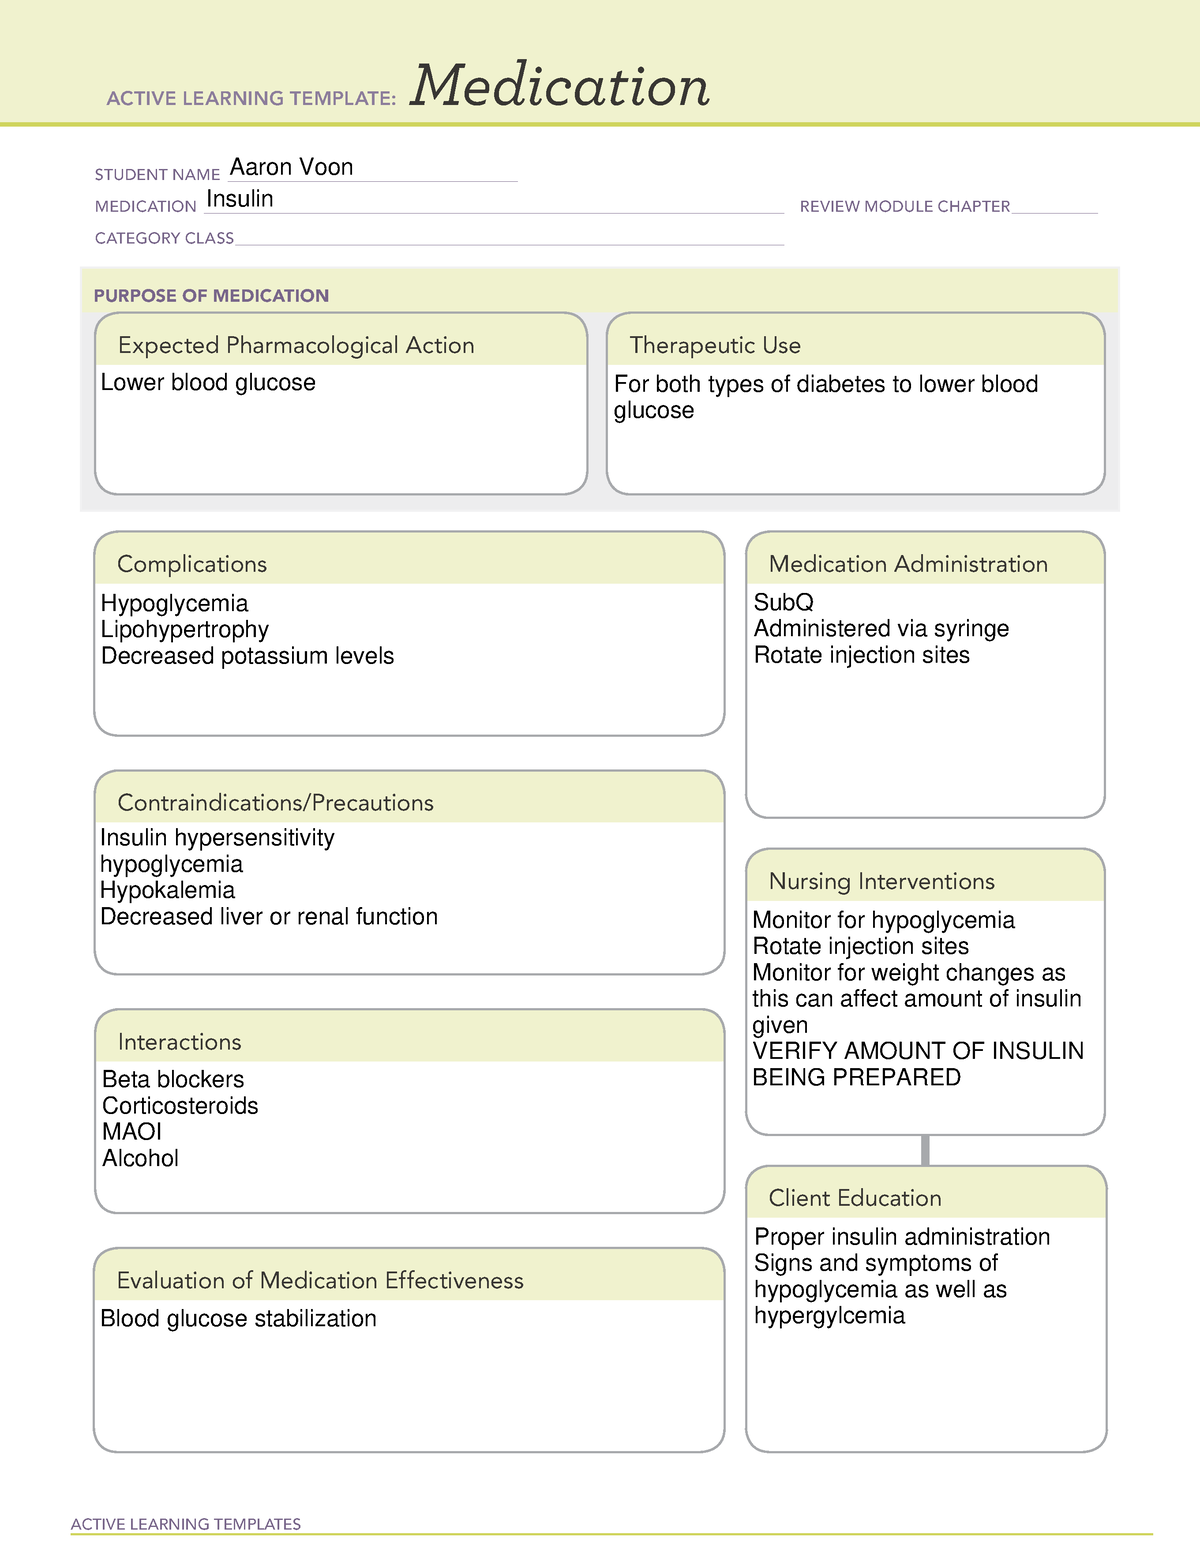 Insulin Medication Template ACTIVE LEARNING TEMPLATES Medication